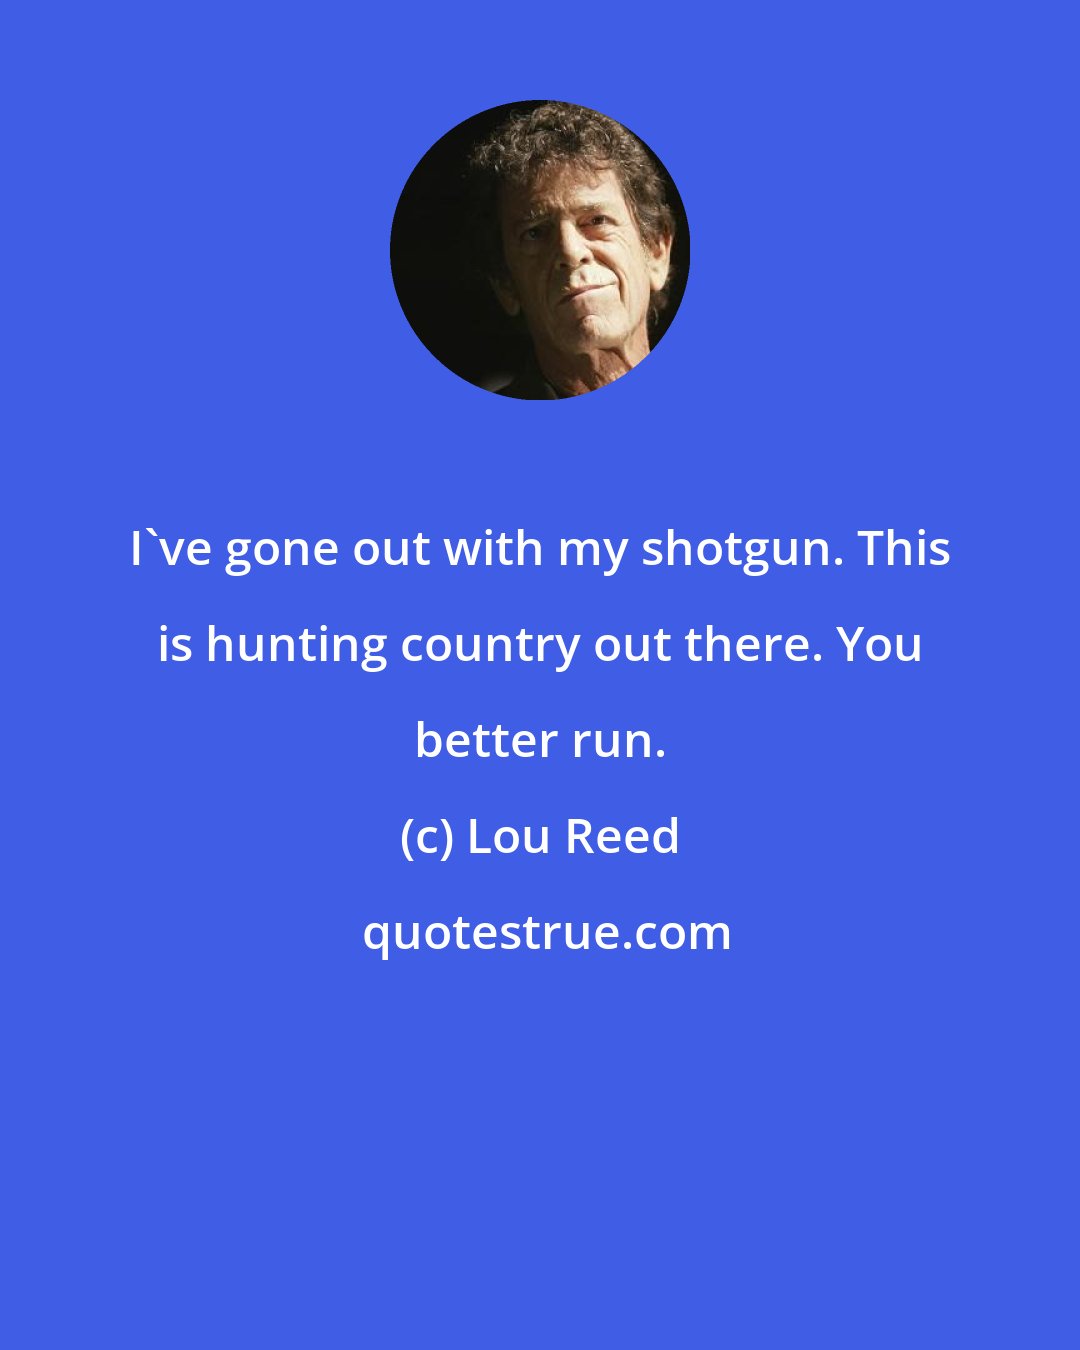 Lou Reed: I've gone out with my shotgun. This is hunting country out there. You better run.